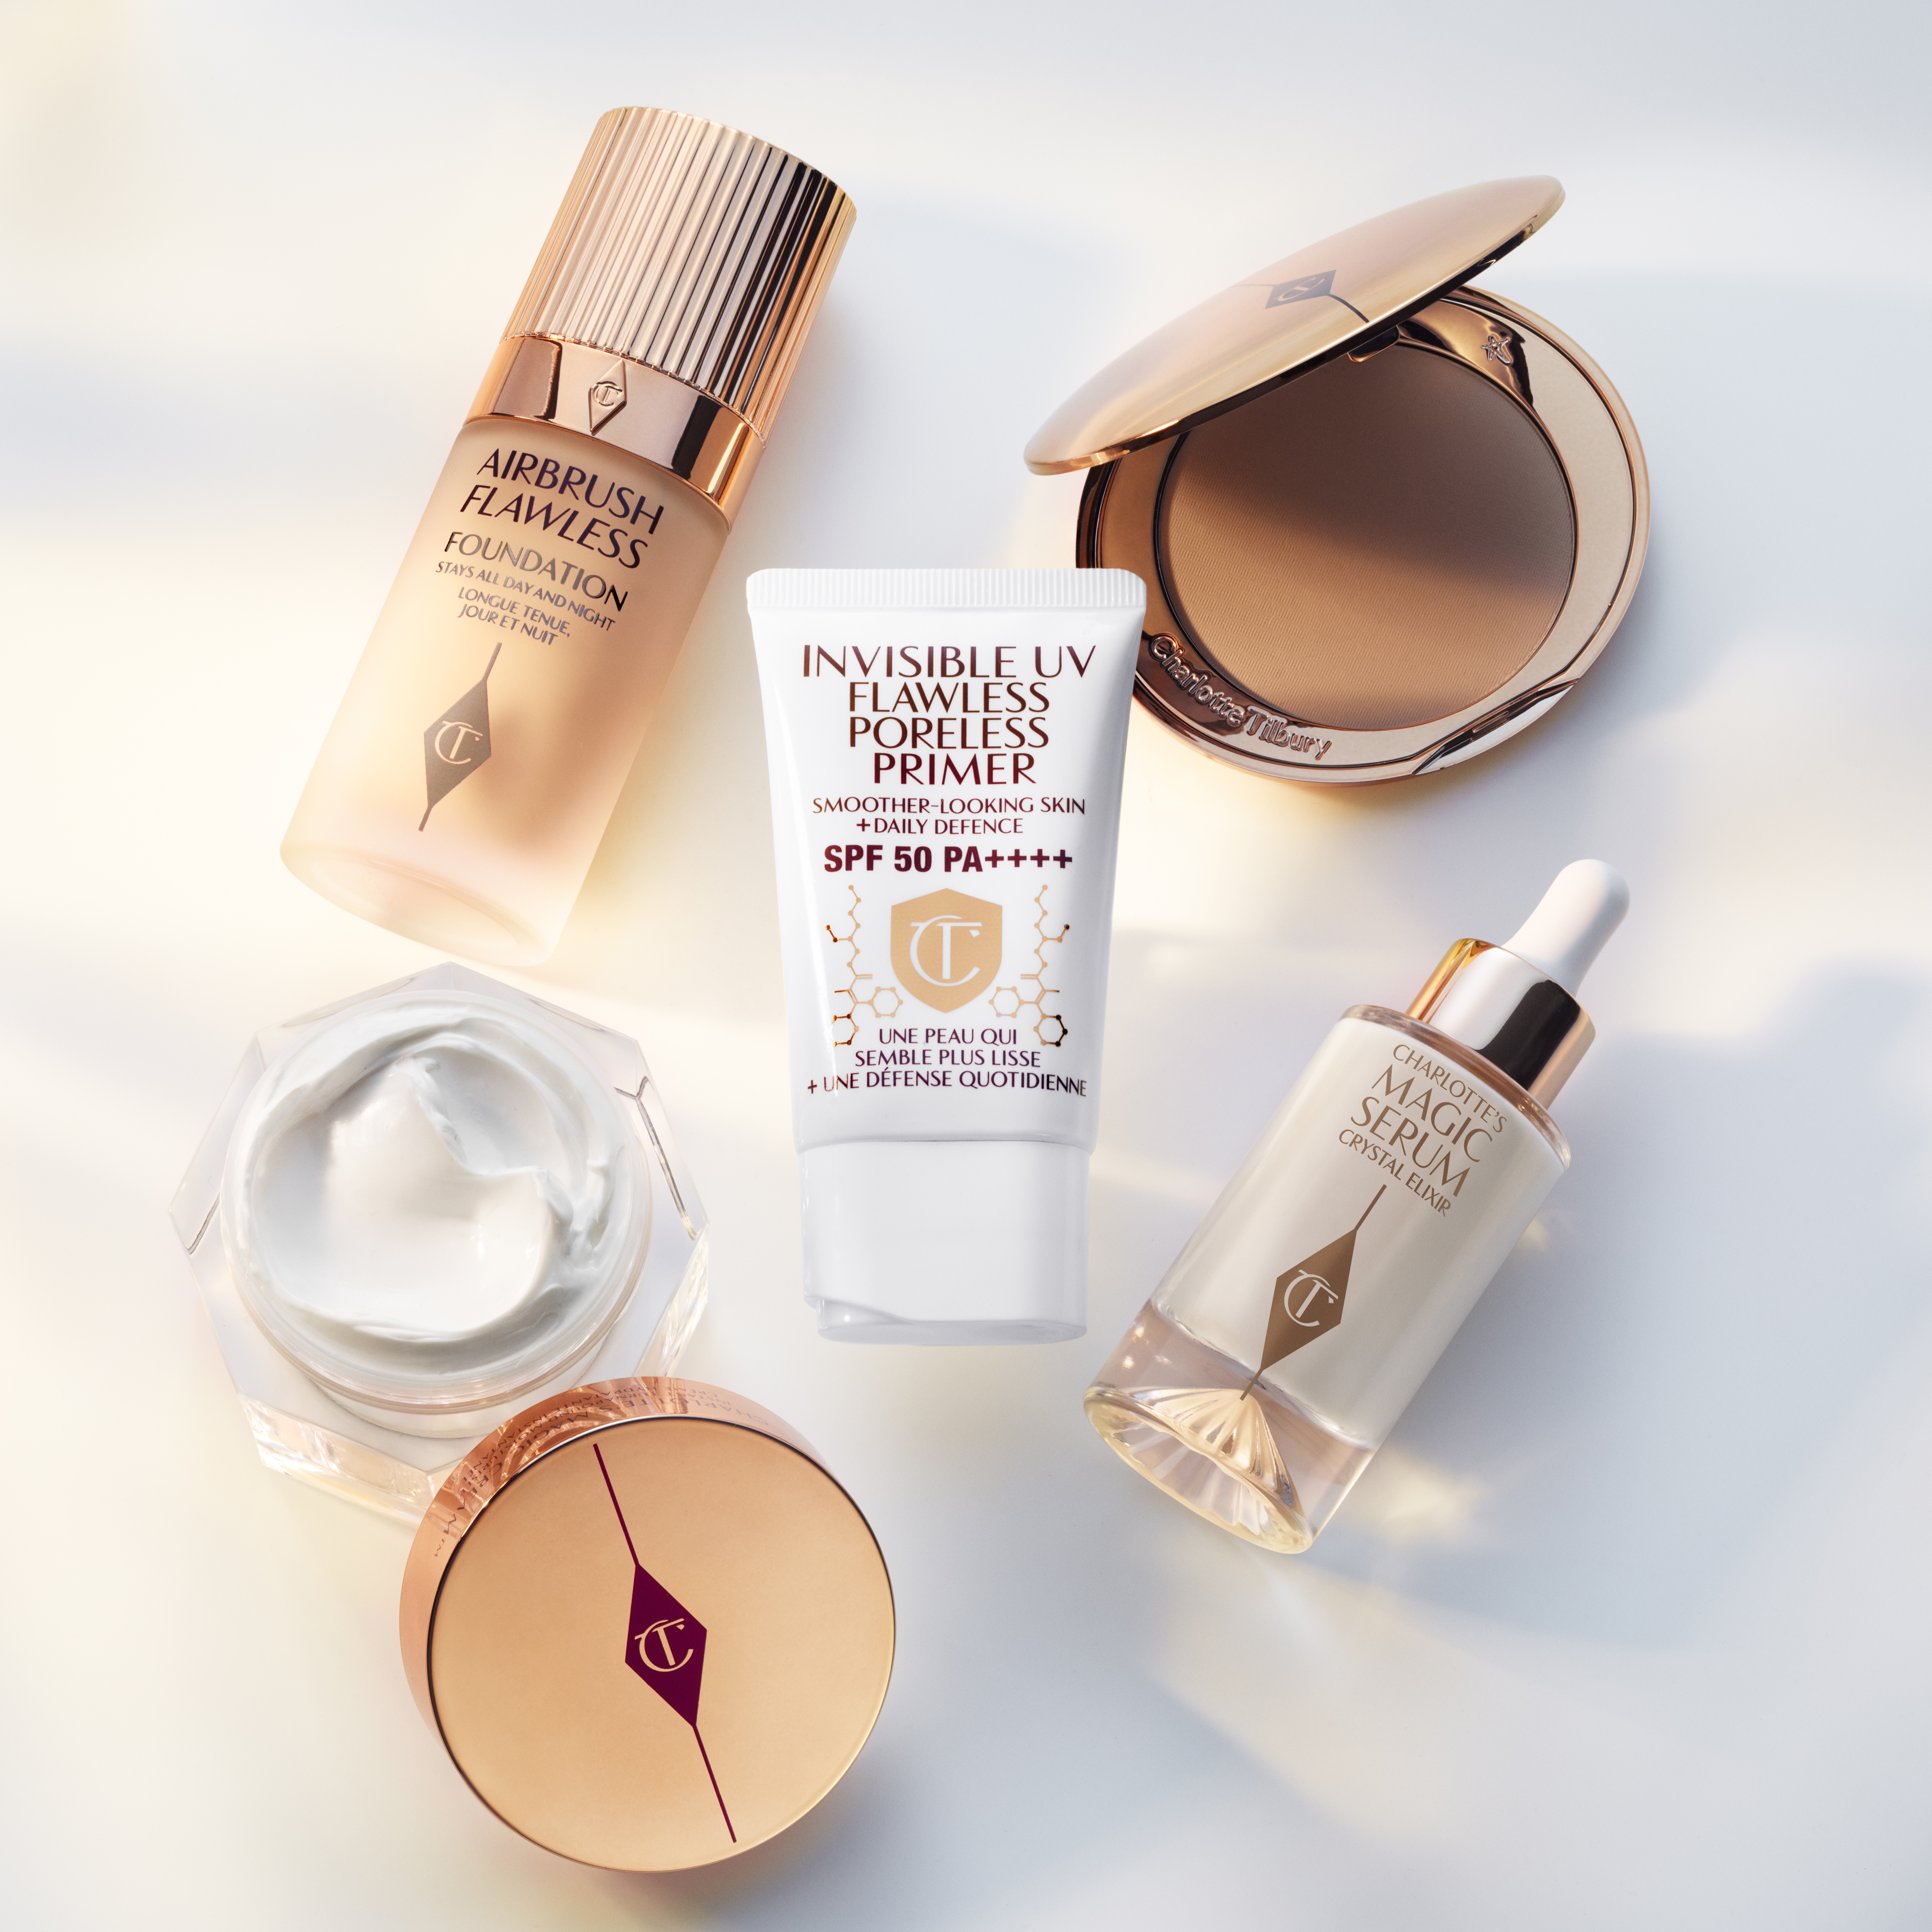 Foundation in a frosted glass bottle with a gold-coloured lid, bronzer compact in sleek, gold-coloured packaging, pearly-white face cream in a glass jar with a gold-coloured lid, luminous, ivory-coloured serum with a dropper lid, and a UV primer in a whit-coloured tube.